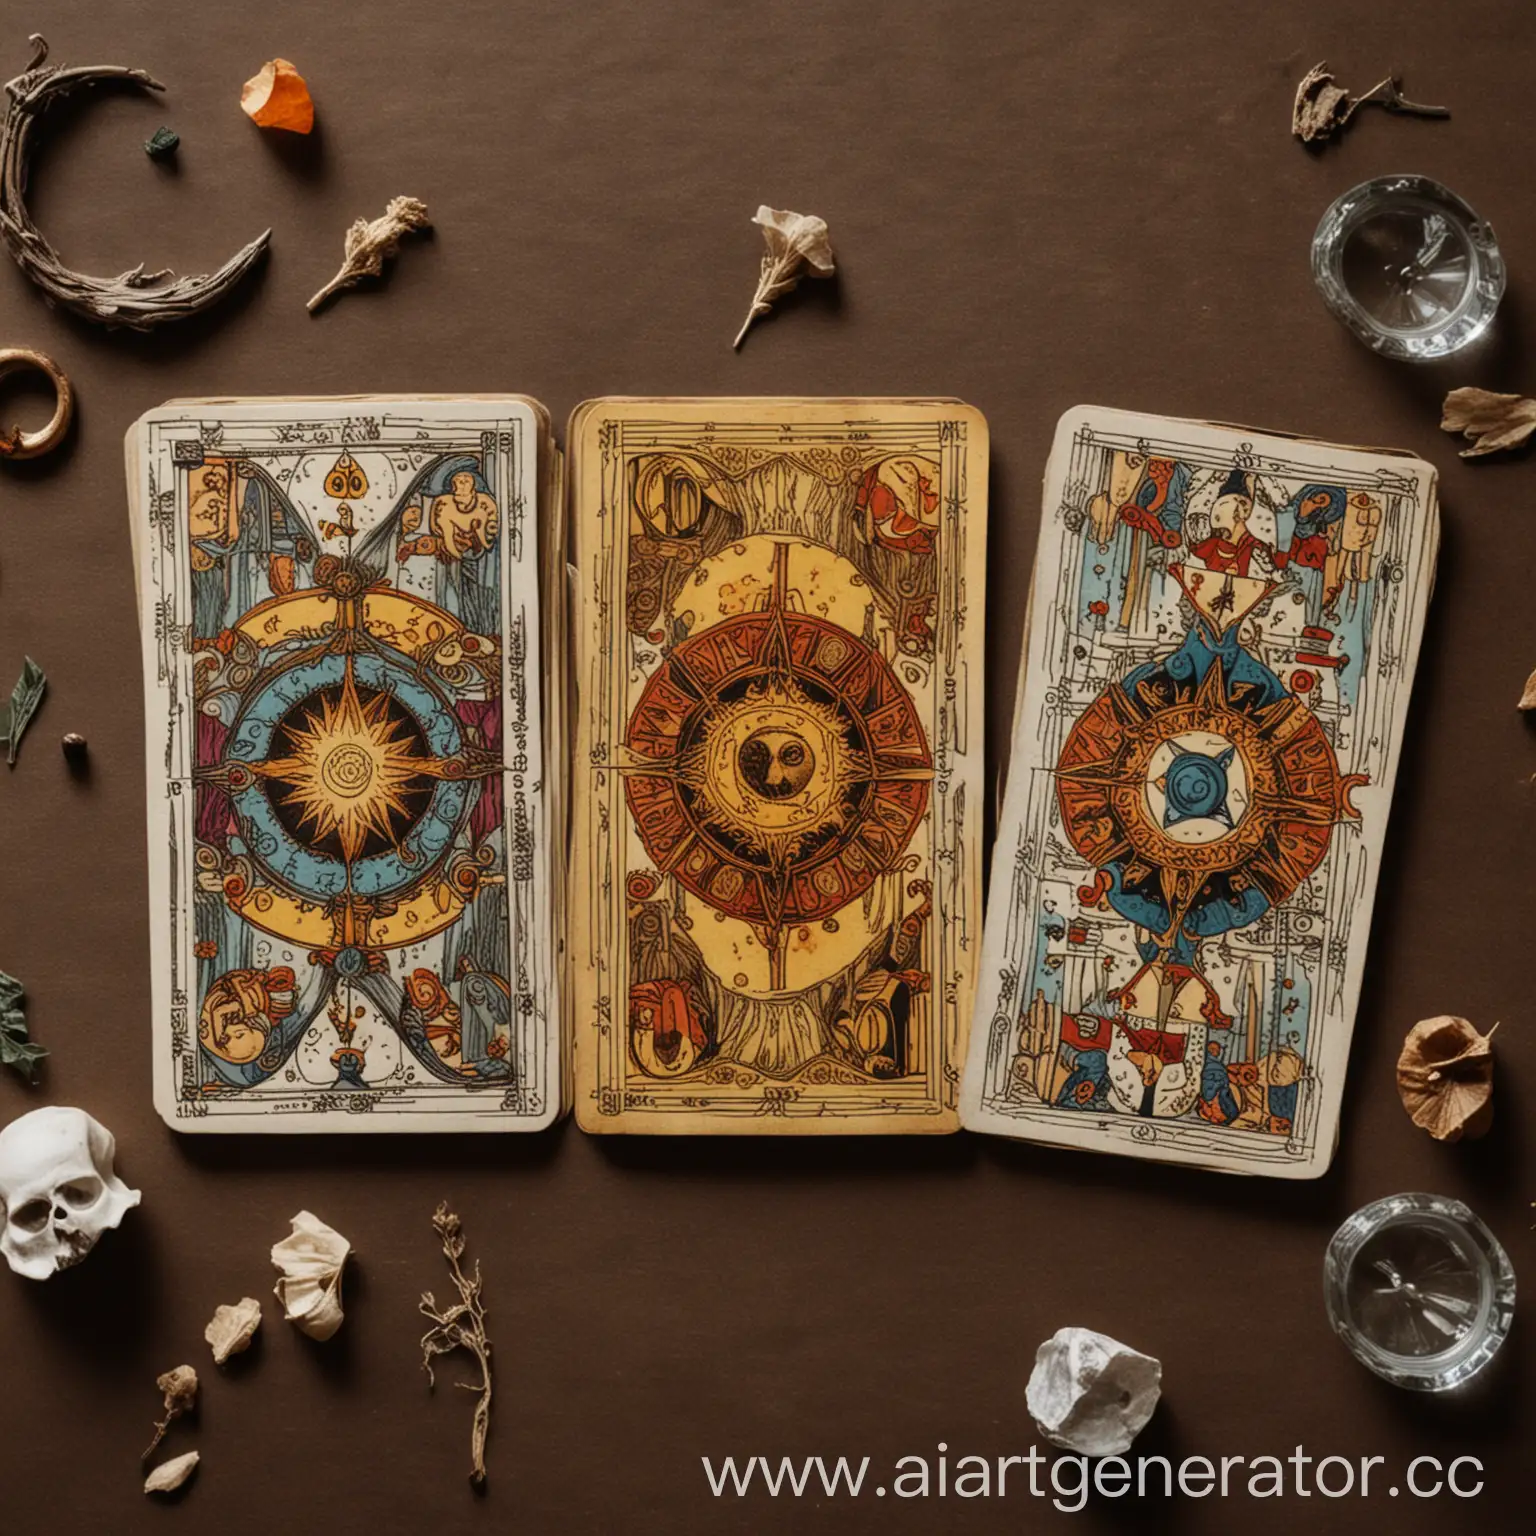 Tarot-Cards-Spread-on-Table-with-Esoteric-Items